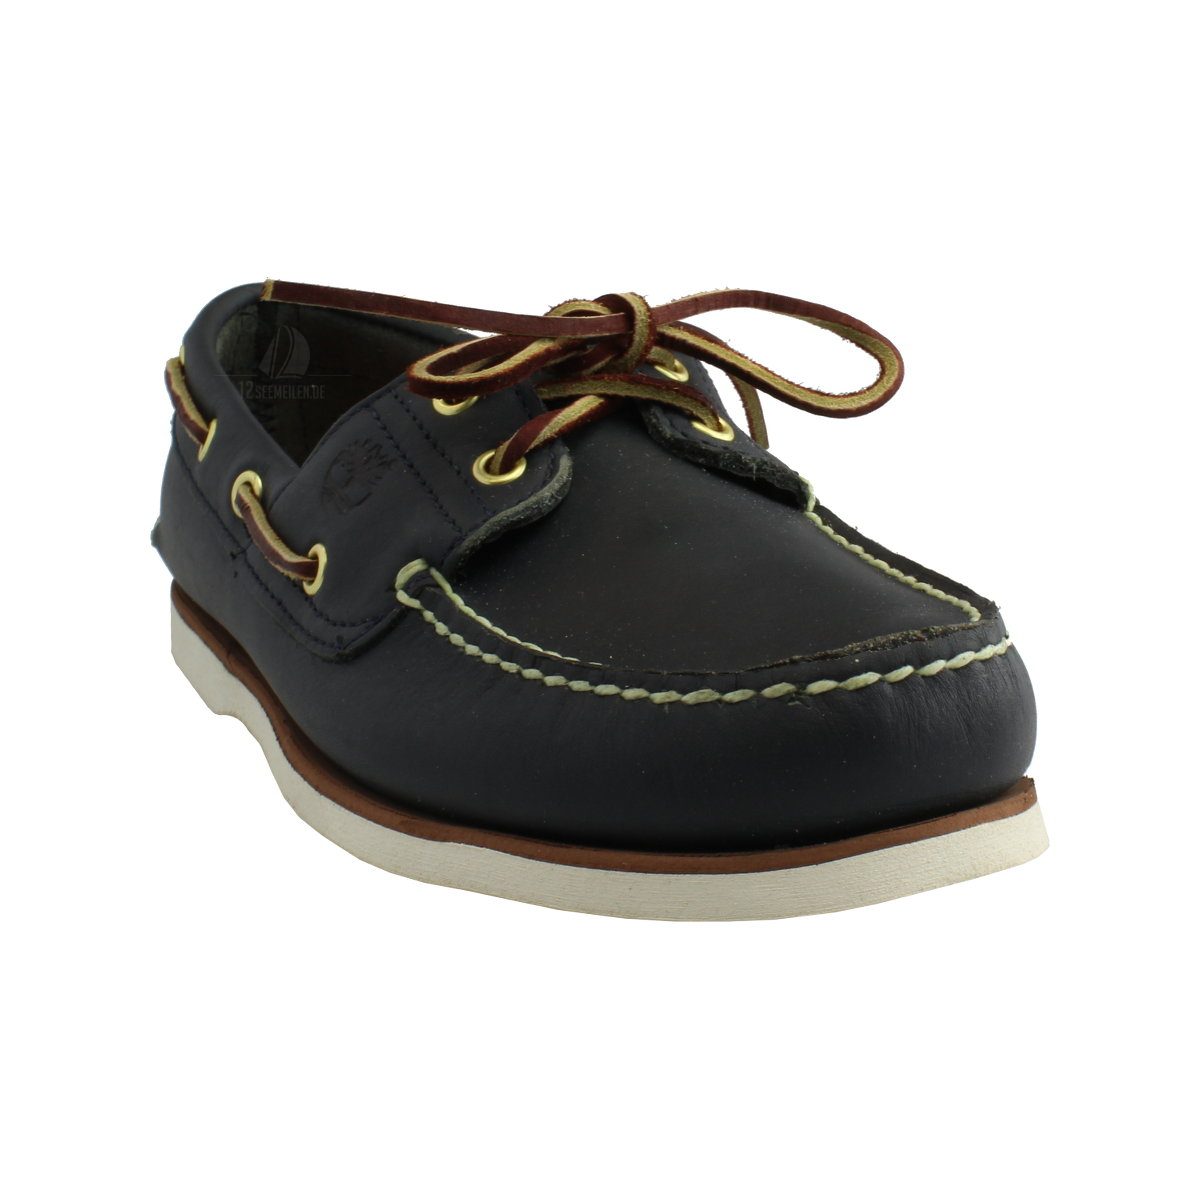 Timberland Classic Boat chaussures bateau homme navy eu 42 ( us 8,5 )